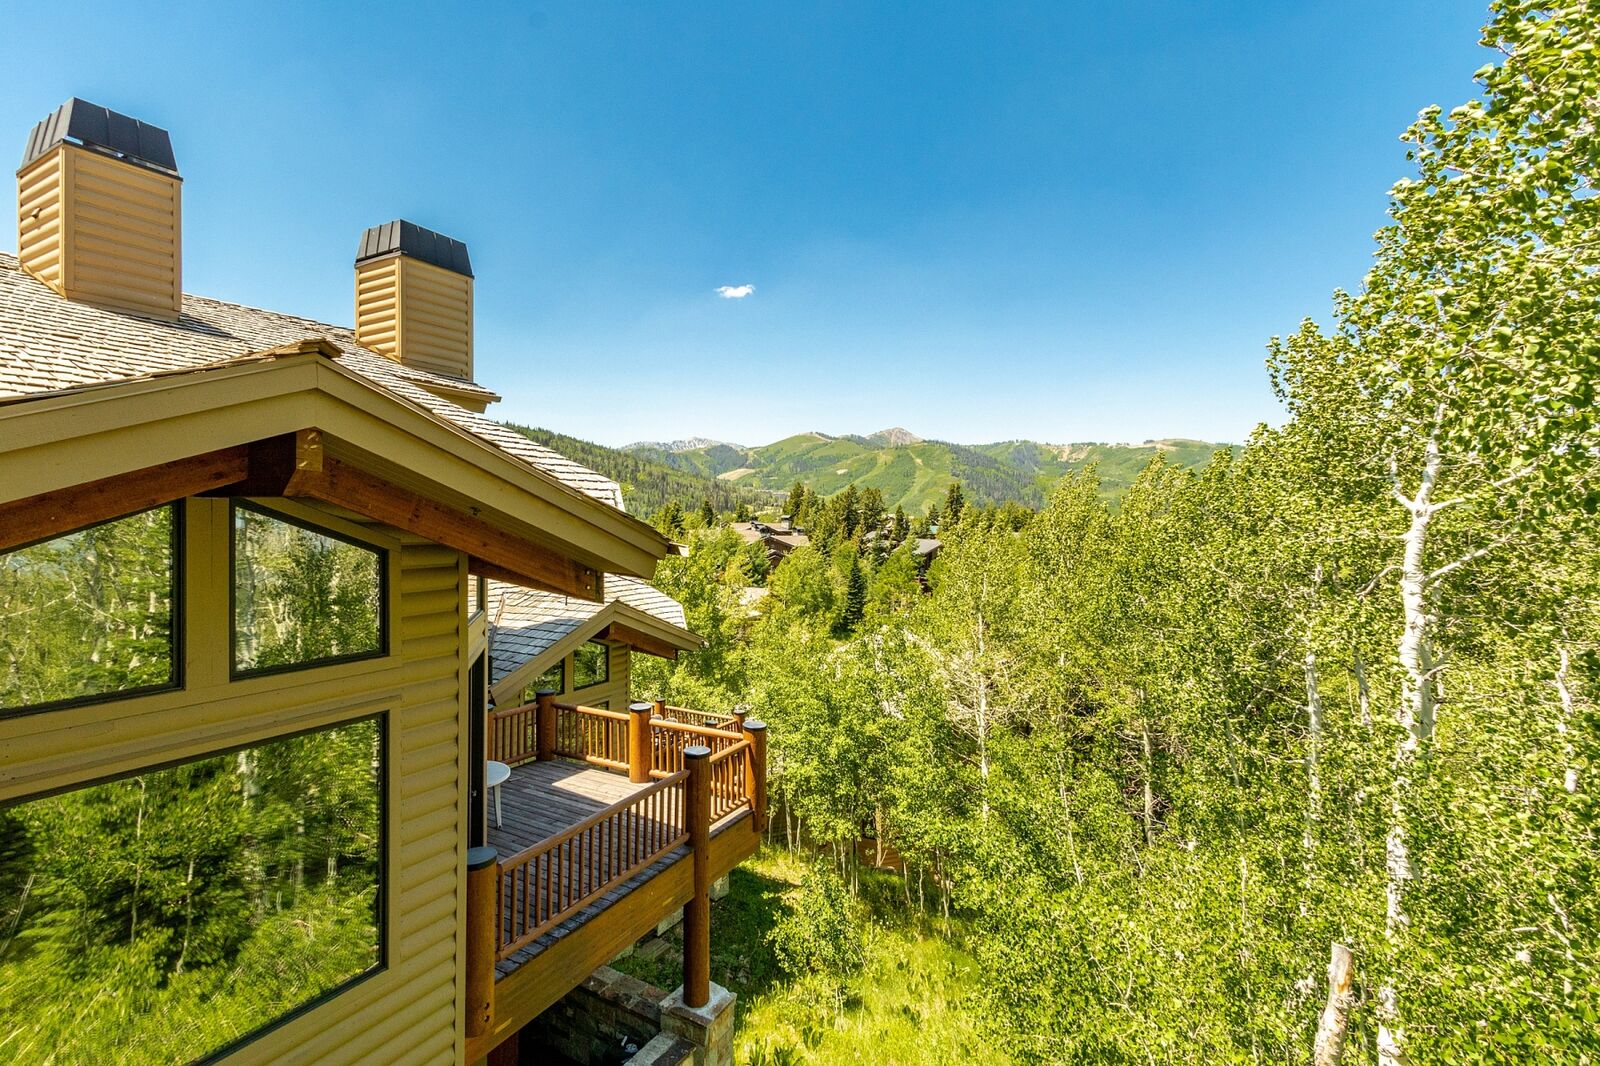 Upper deck off great room with clear views toward Deer Valley ski runs. Not pictured: natural gas firepit table, carved redwood lounge chairs, gas BBQ.